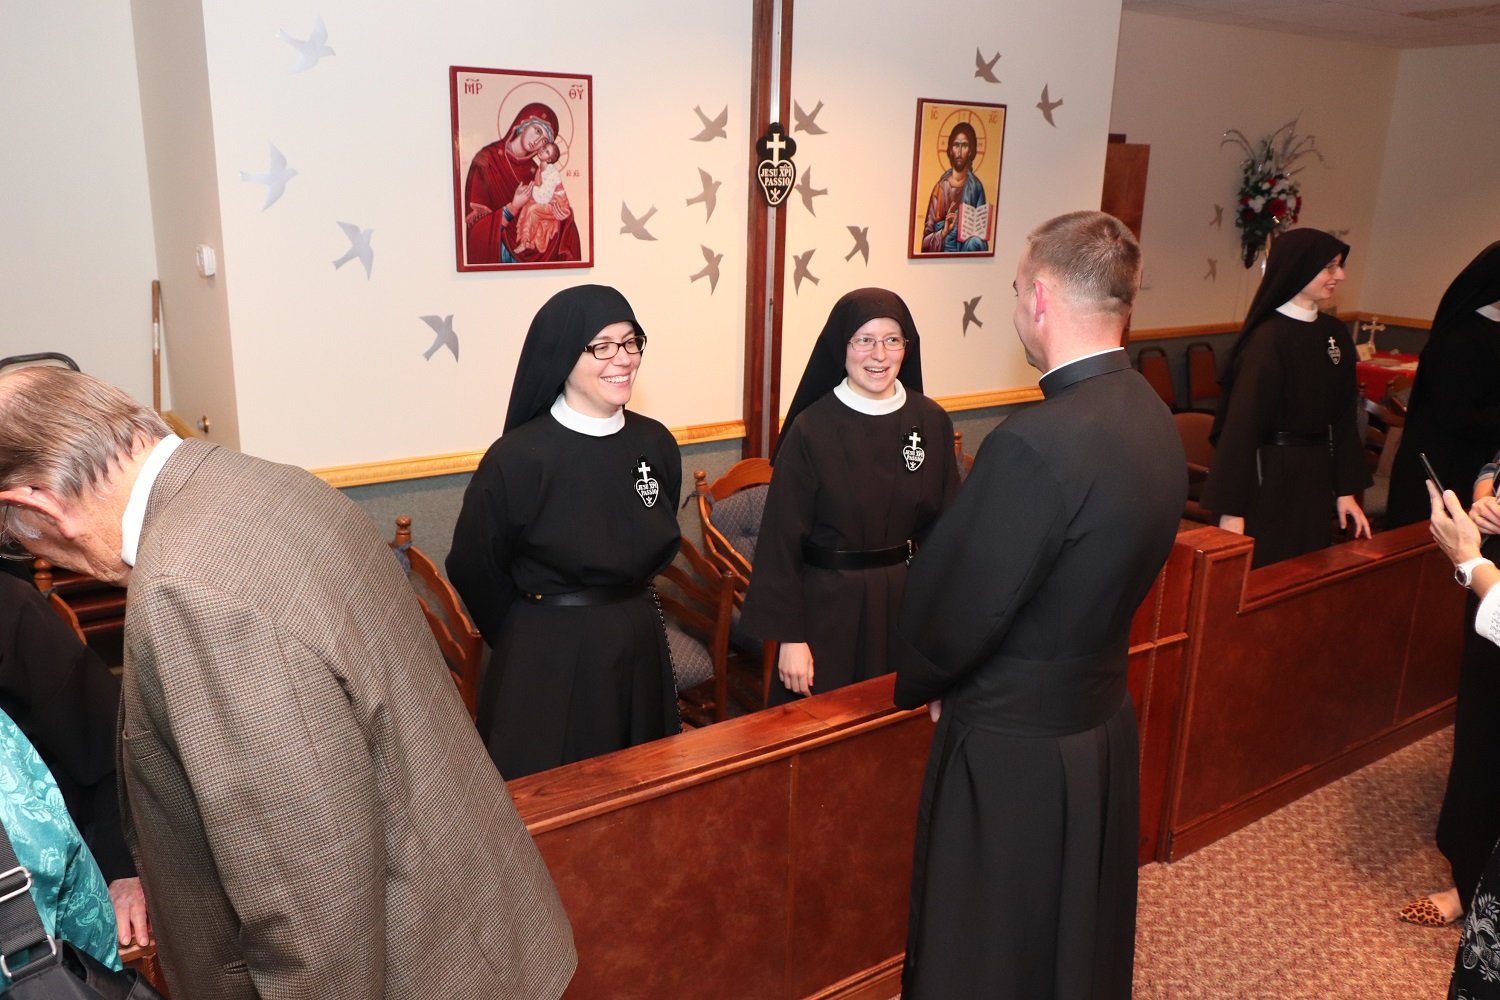  Sisters Frances Marie and Maria Faustina enjoy a chat with Fr. Jeff 